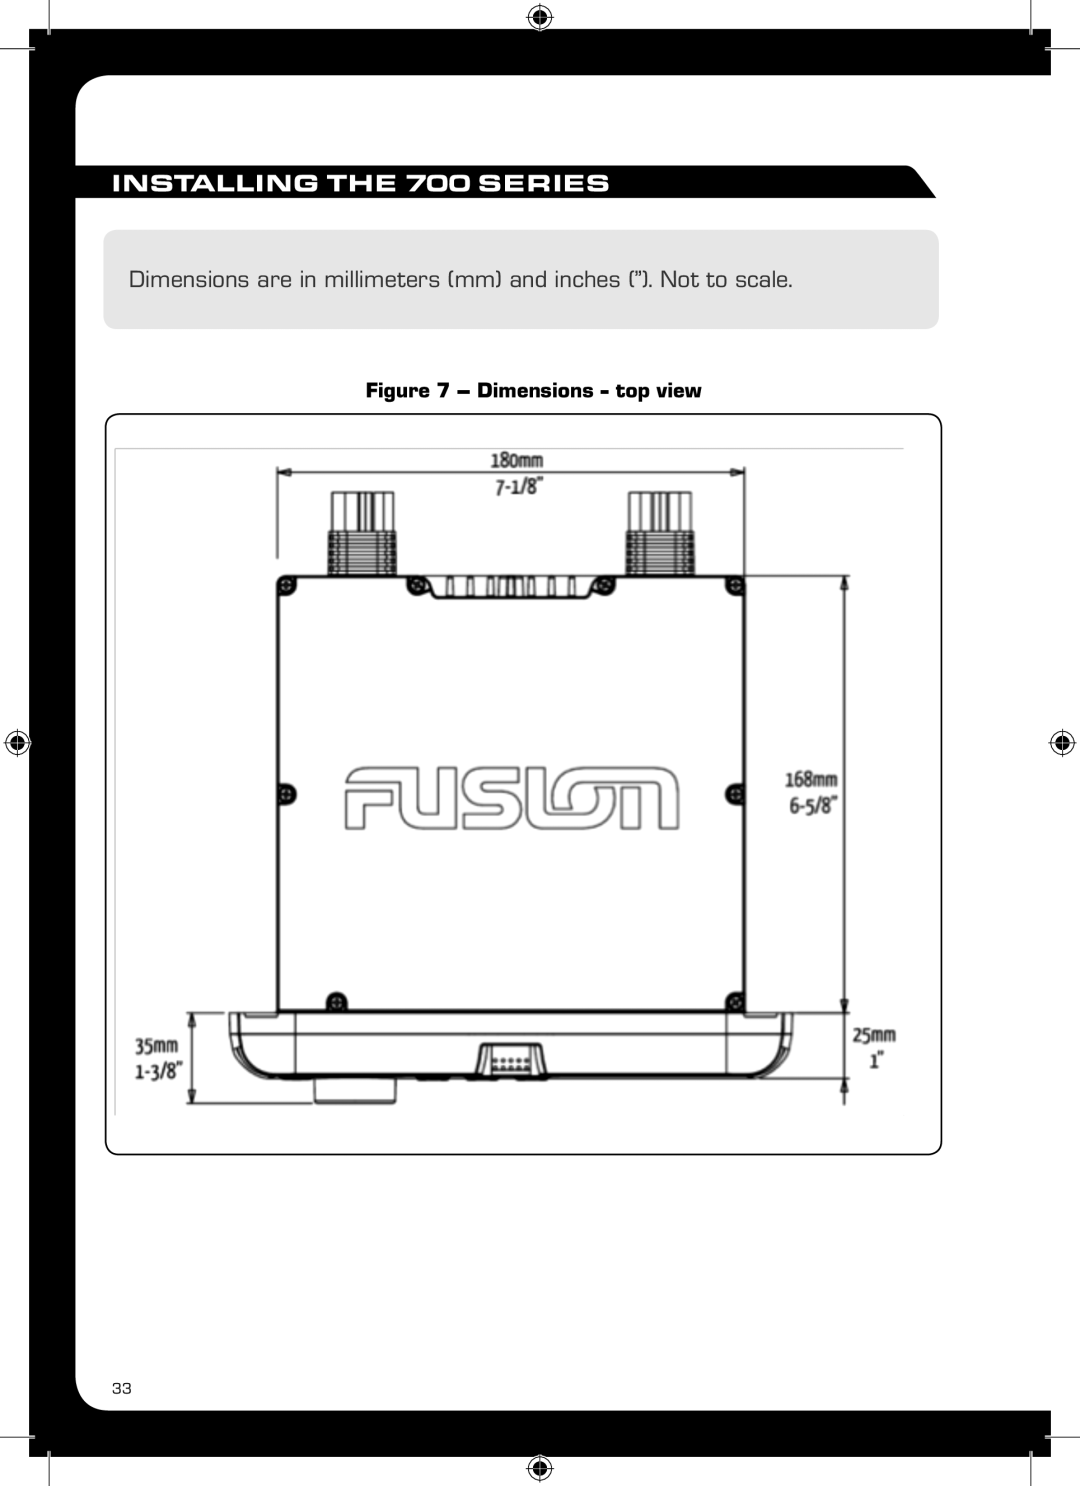 Fusion MS-IP700, MS-AV700 manual INSTALLING THE 700 SERIES, Dimensions are in millimeters mm and inches ”. Not to scale 